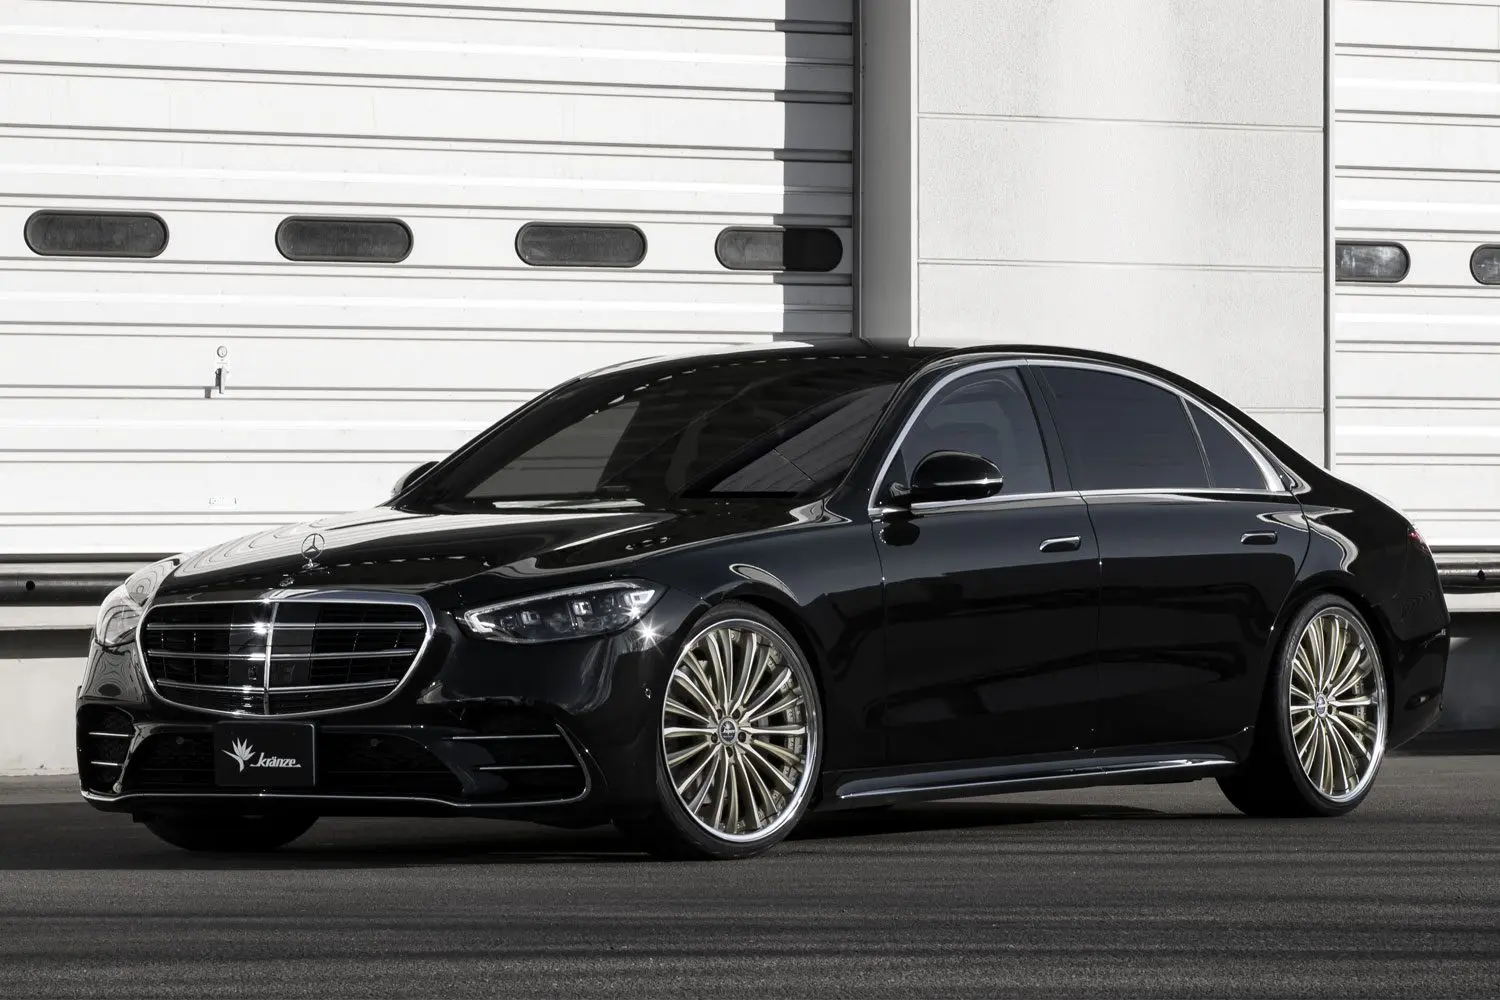 The black mercedes s class is parked in front of a garage.